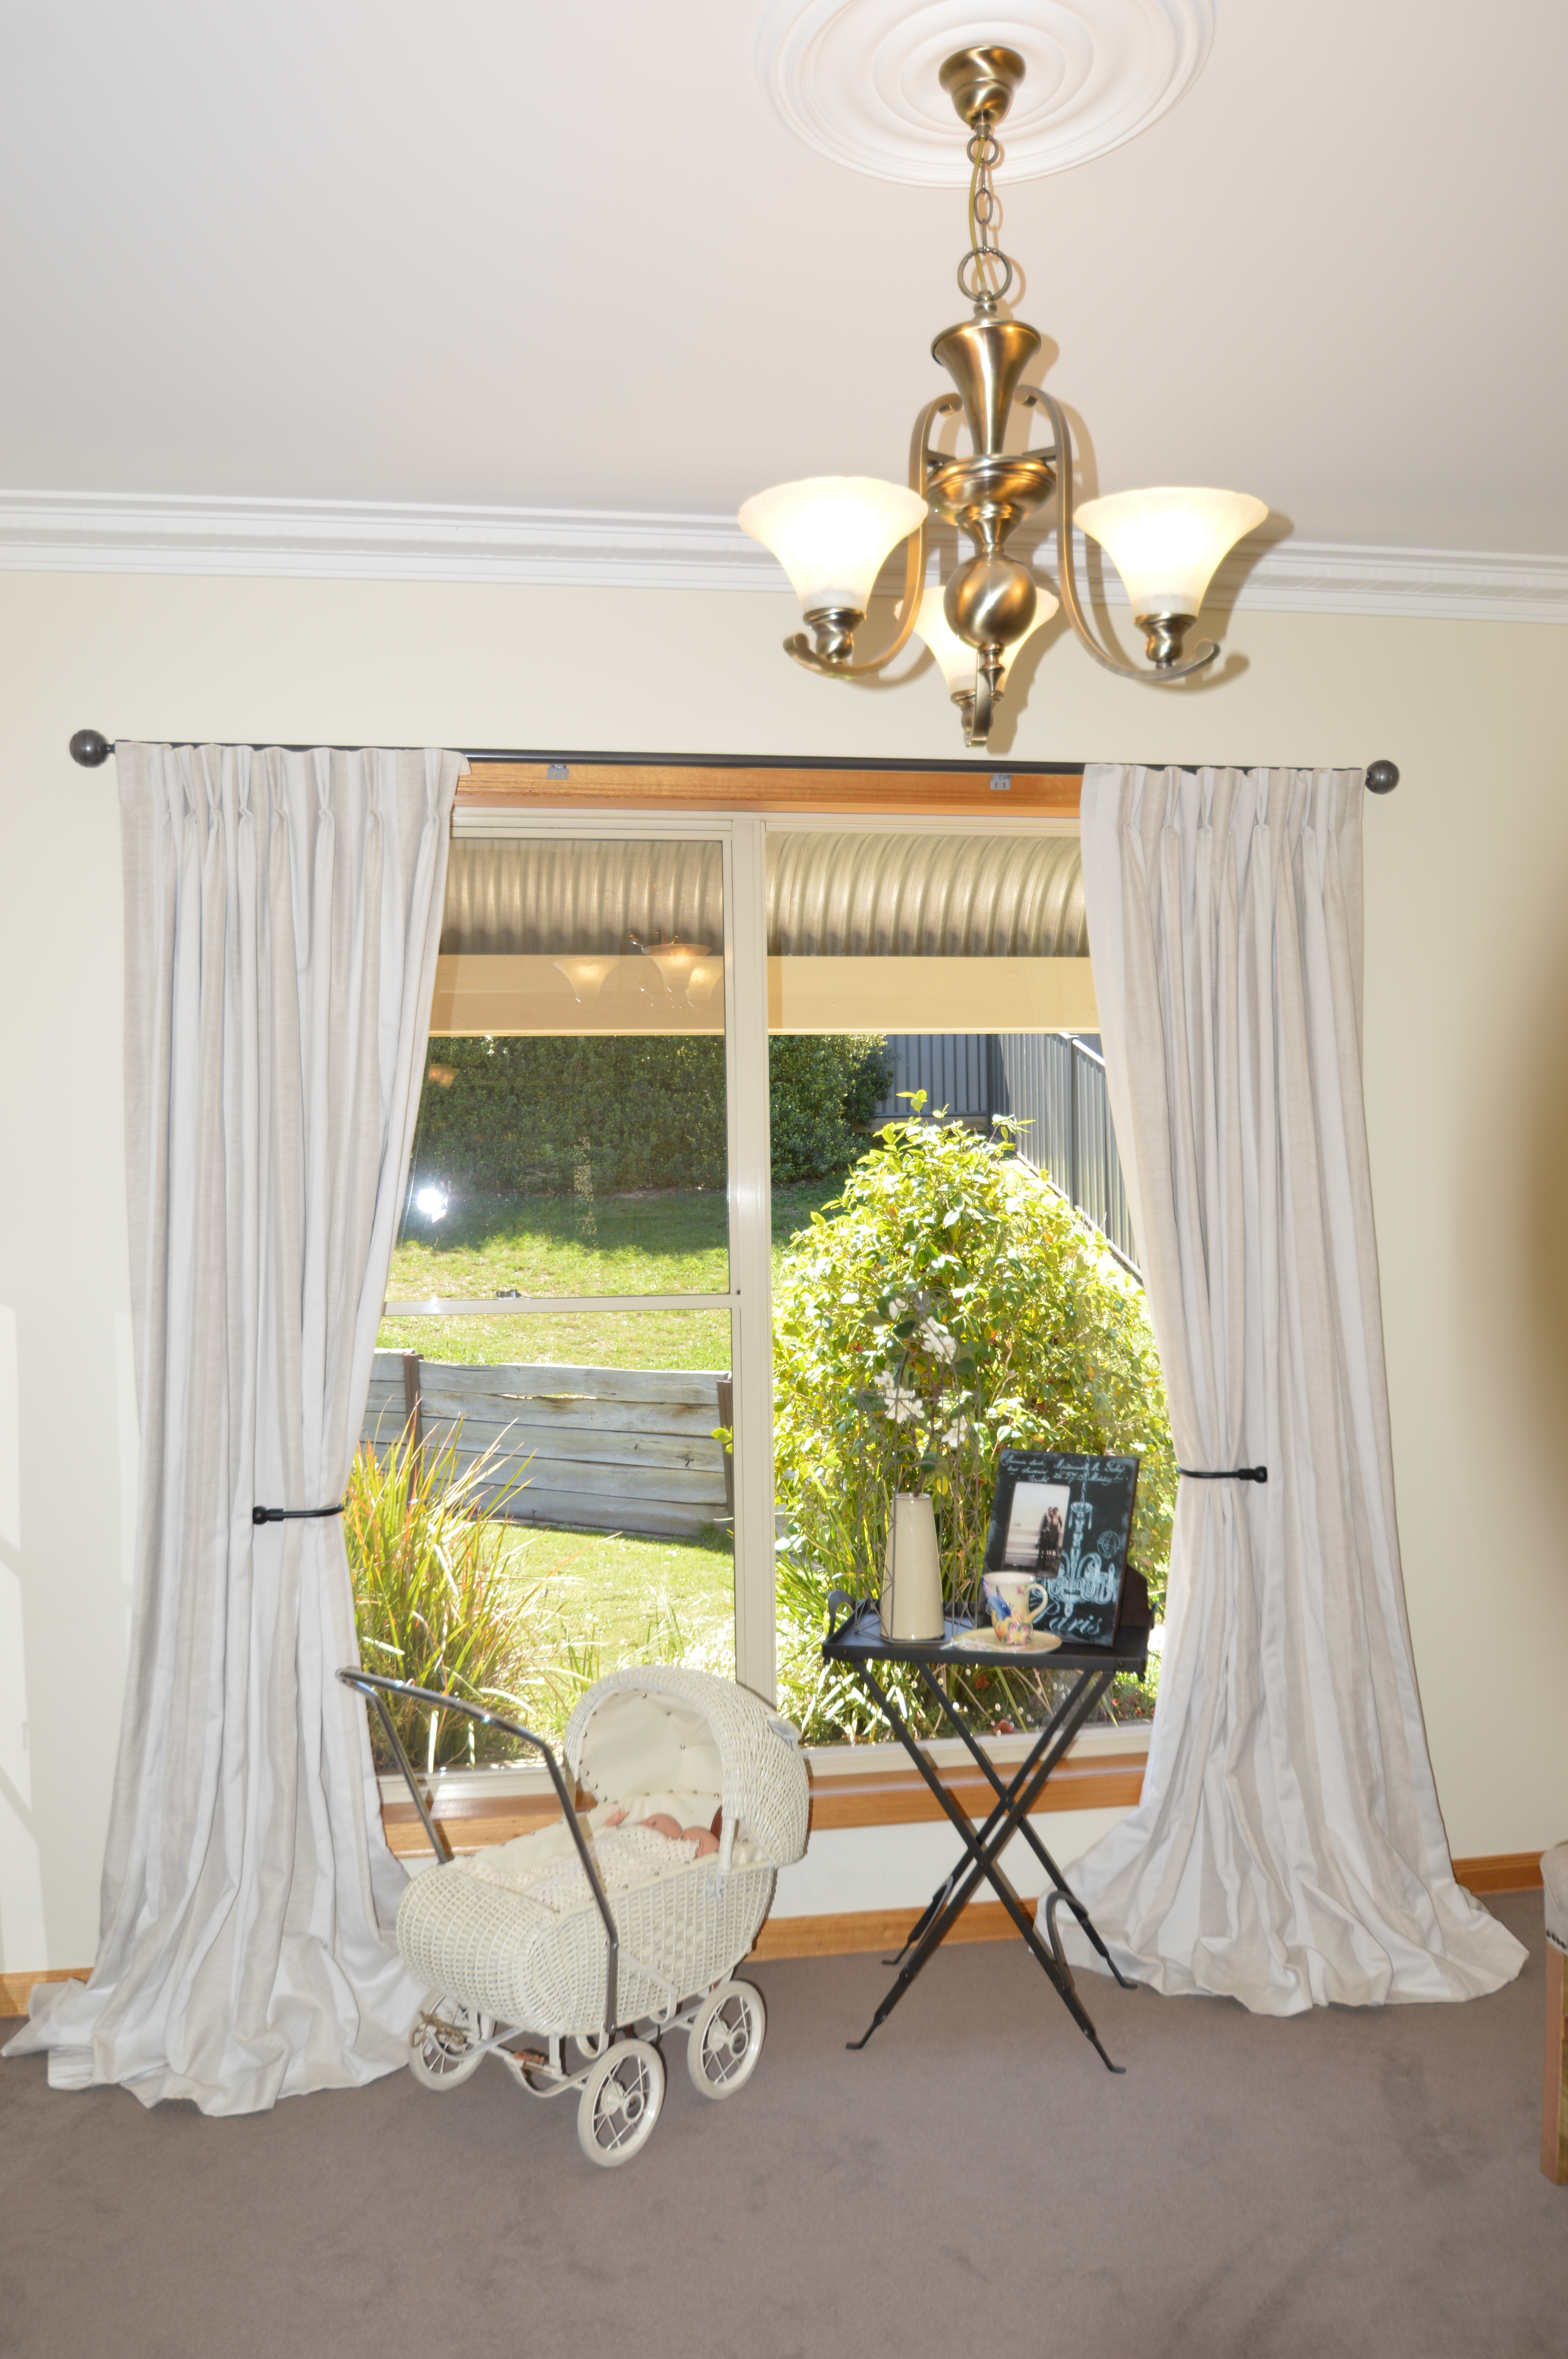 Picking Drapes And Blinds For Luxurious Settings